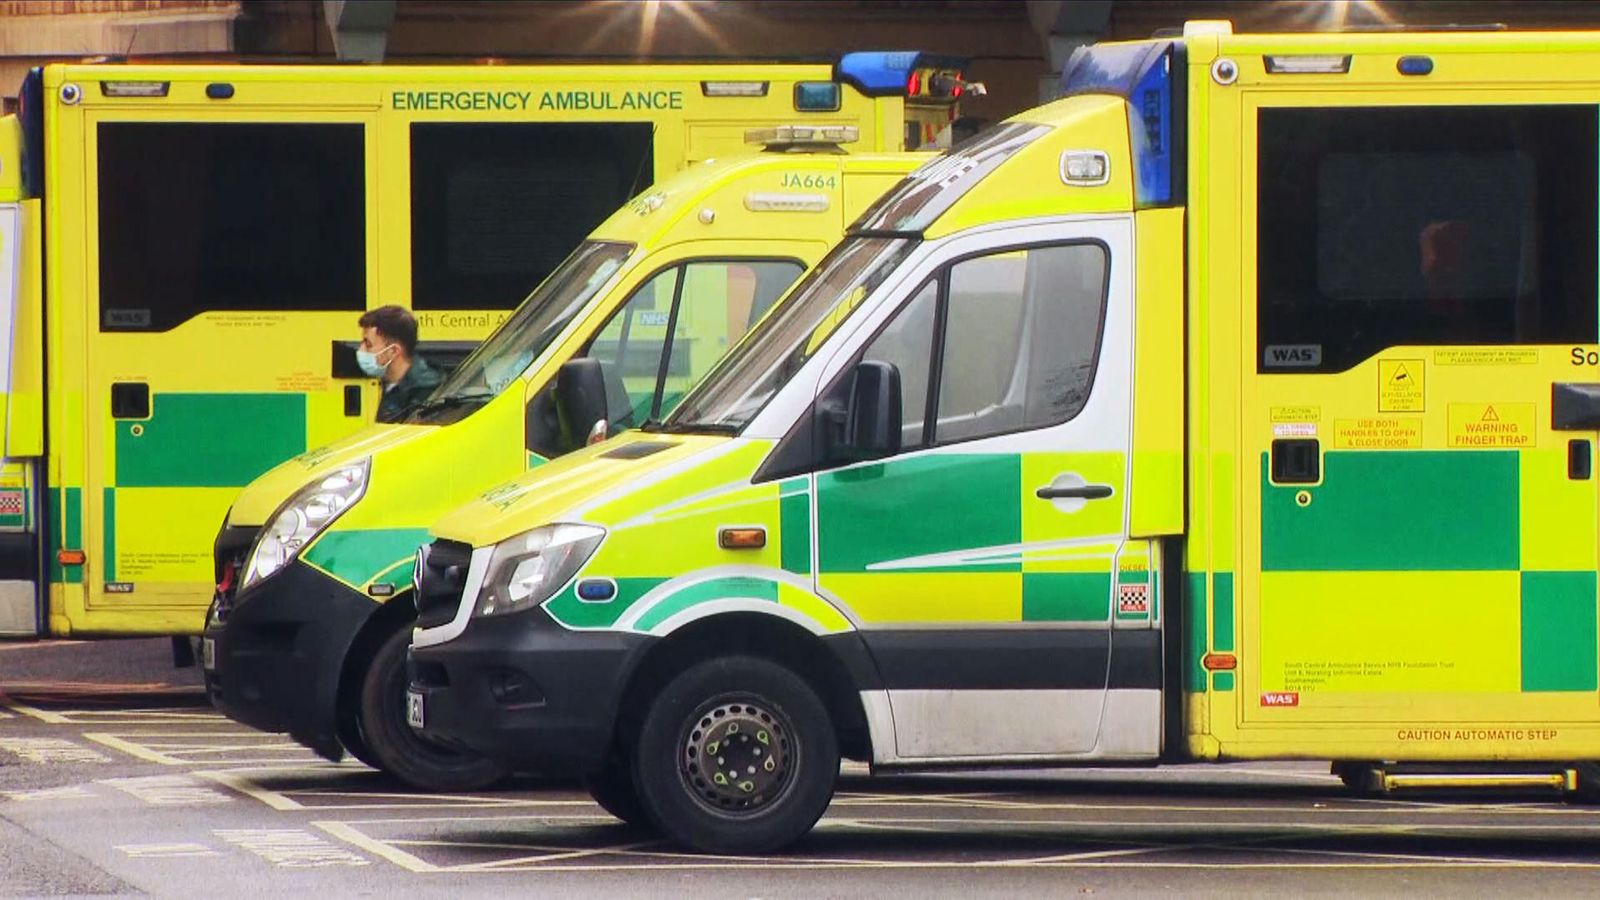 'Critical incidents' declared at hospital and ambulance trusts across England and Wales